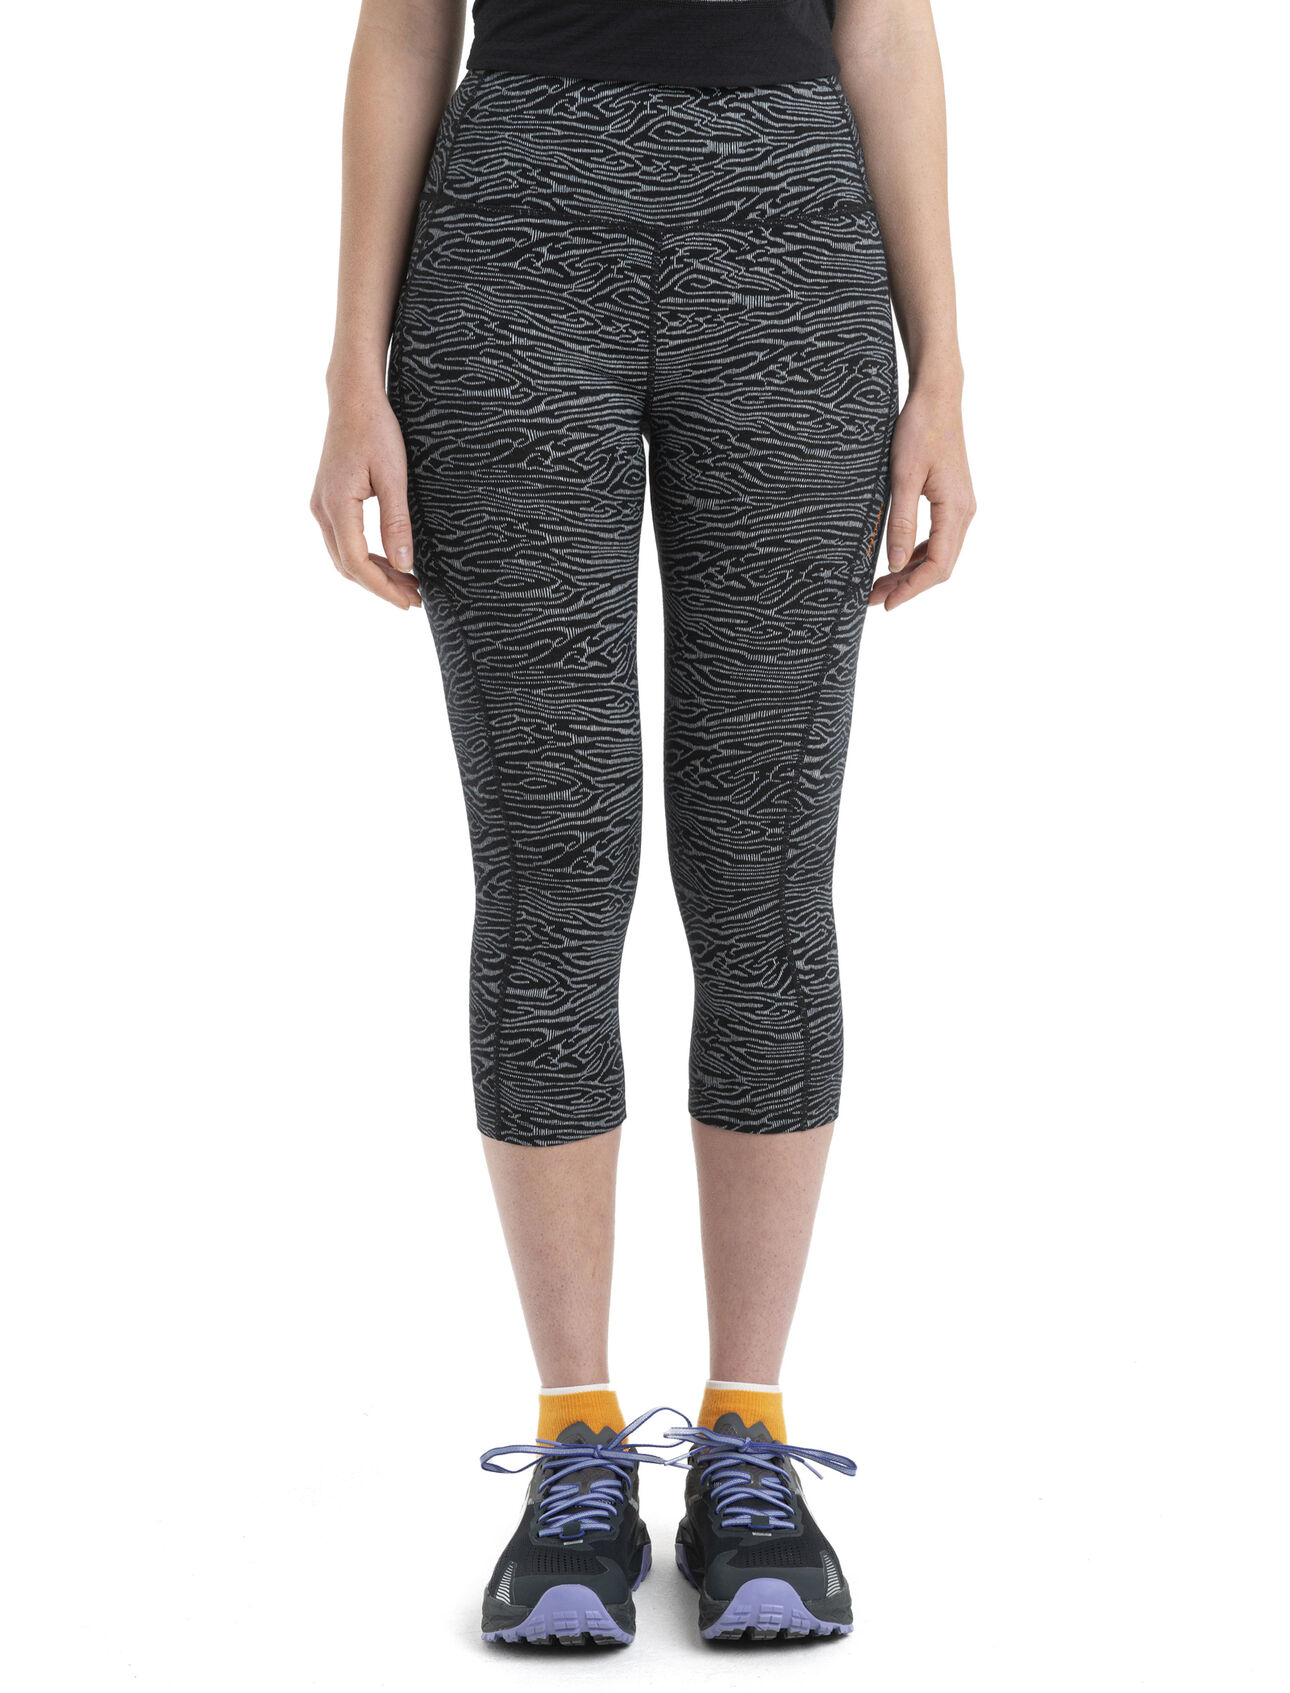 Womens Merino Fastray High Rise 3/4 Tights IB Topo Lines Functional, form-fitting bottoms for active performance on or off the trail, the Fastray High Rise 3/4 Tights Topo Lines feature a stretchy merino wool blend with a high waist for added coverage. The dynamic all-over print comes from a combination of topographic contour lines and animal prints. 